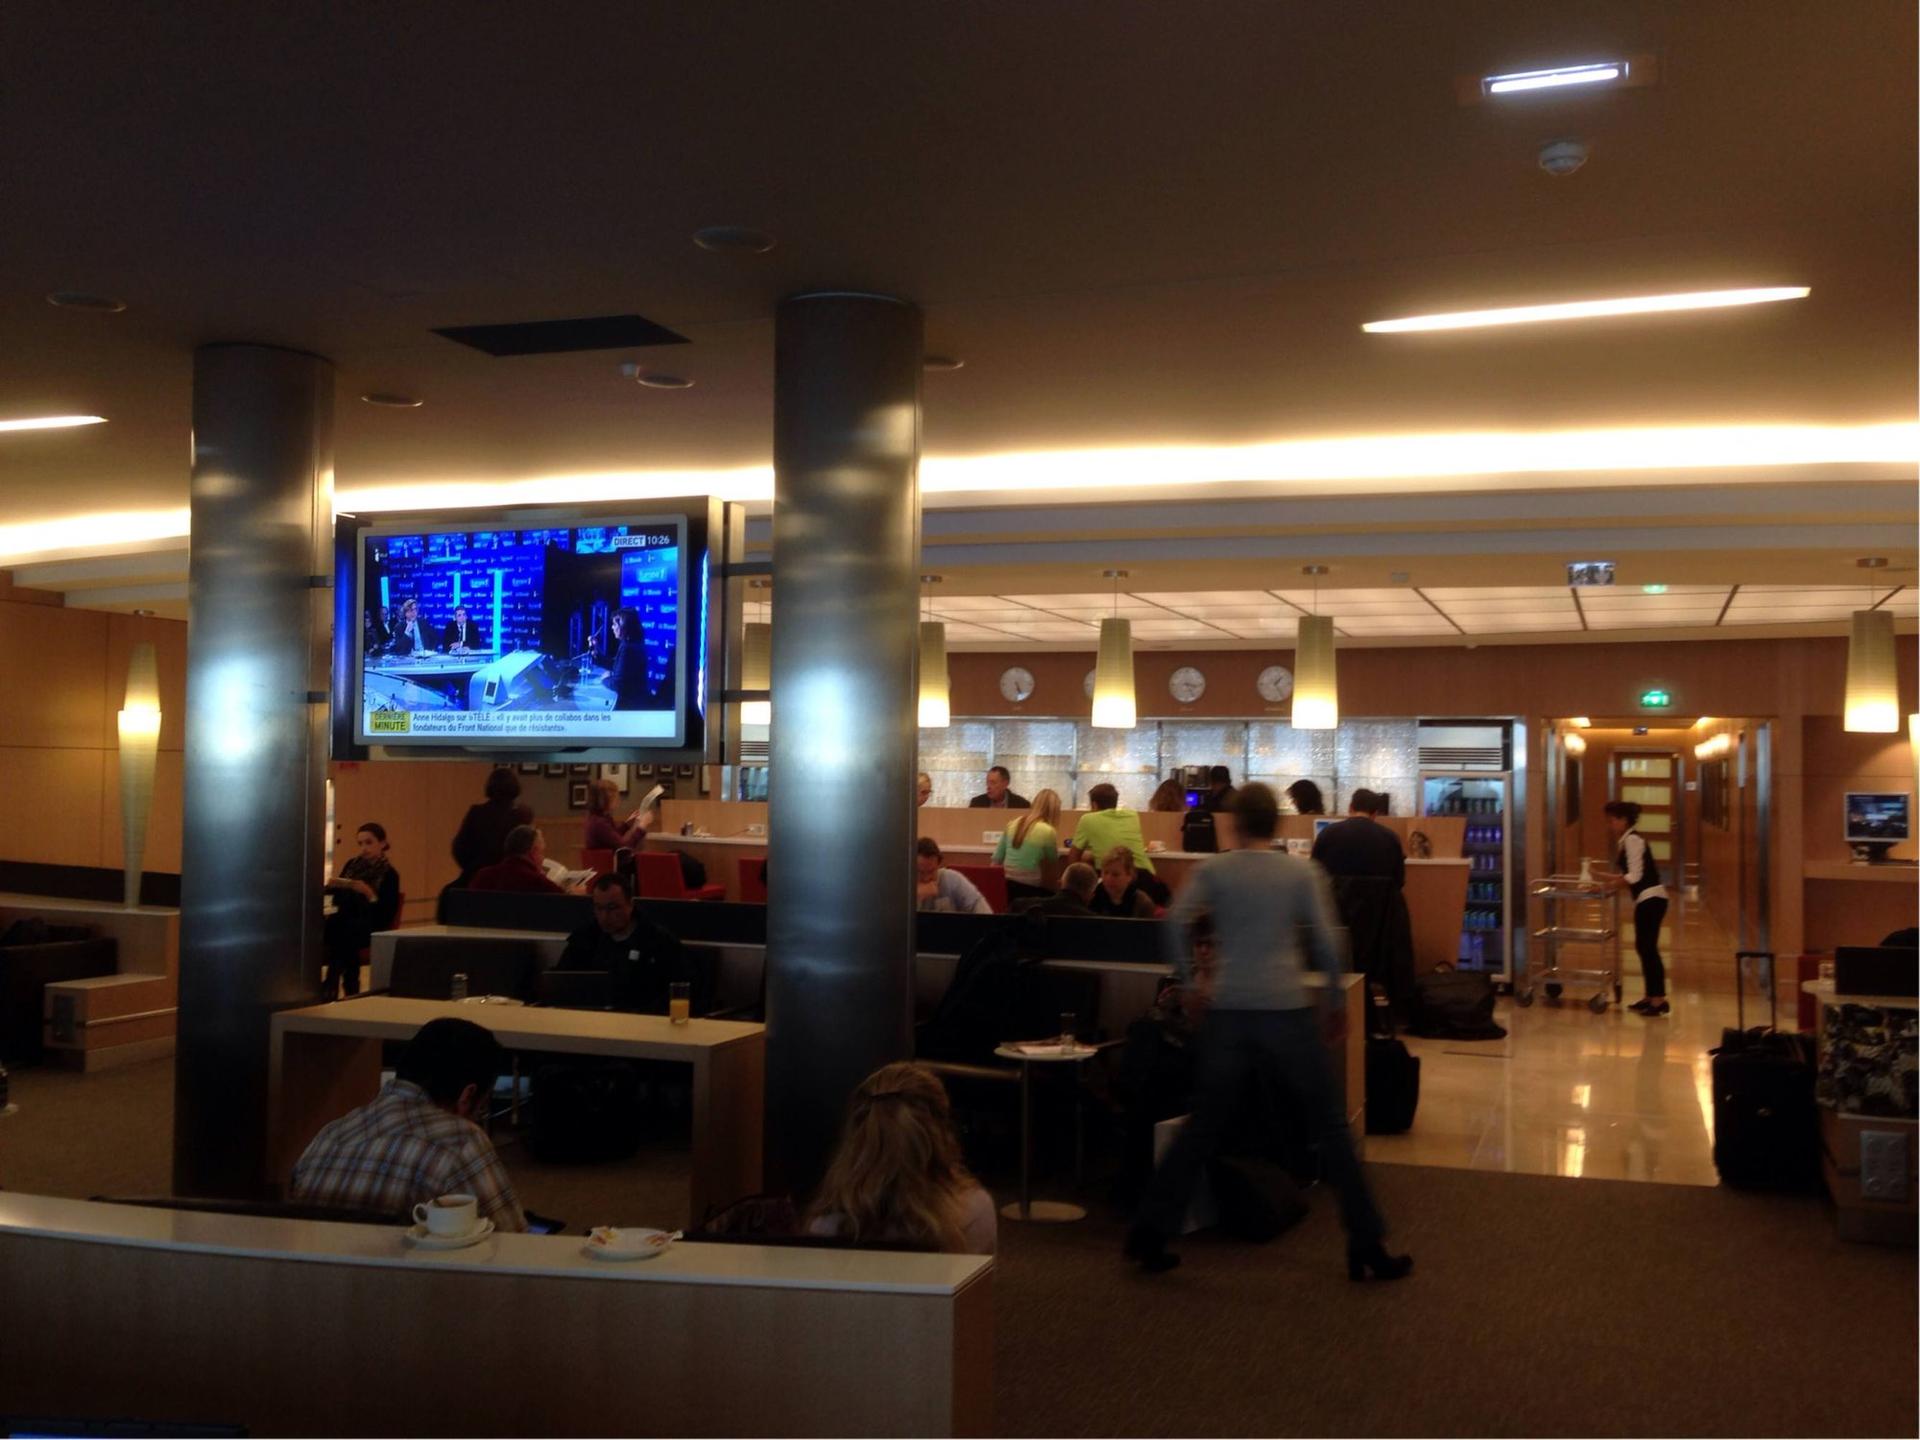 American Airlines Admirals Club  image 8 of 25